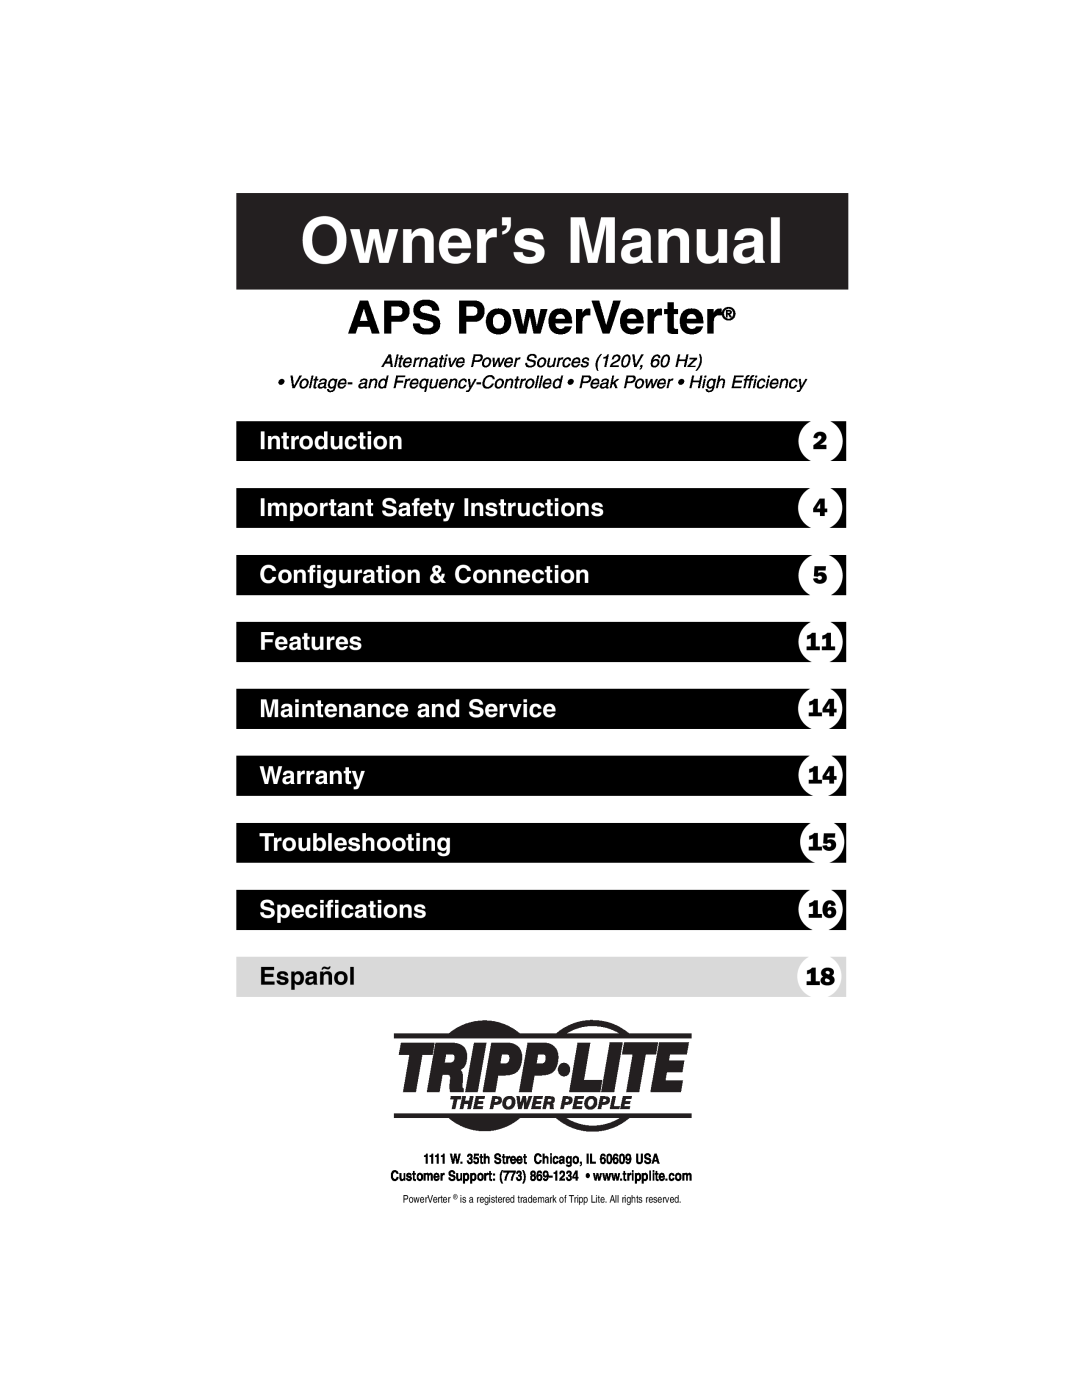 Tripp Lite Alternative Power Source owner manual APS PowerVerter, Introduction, Important Safety Instructions, Features 